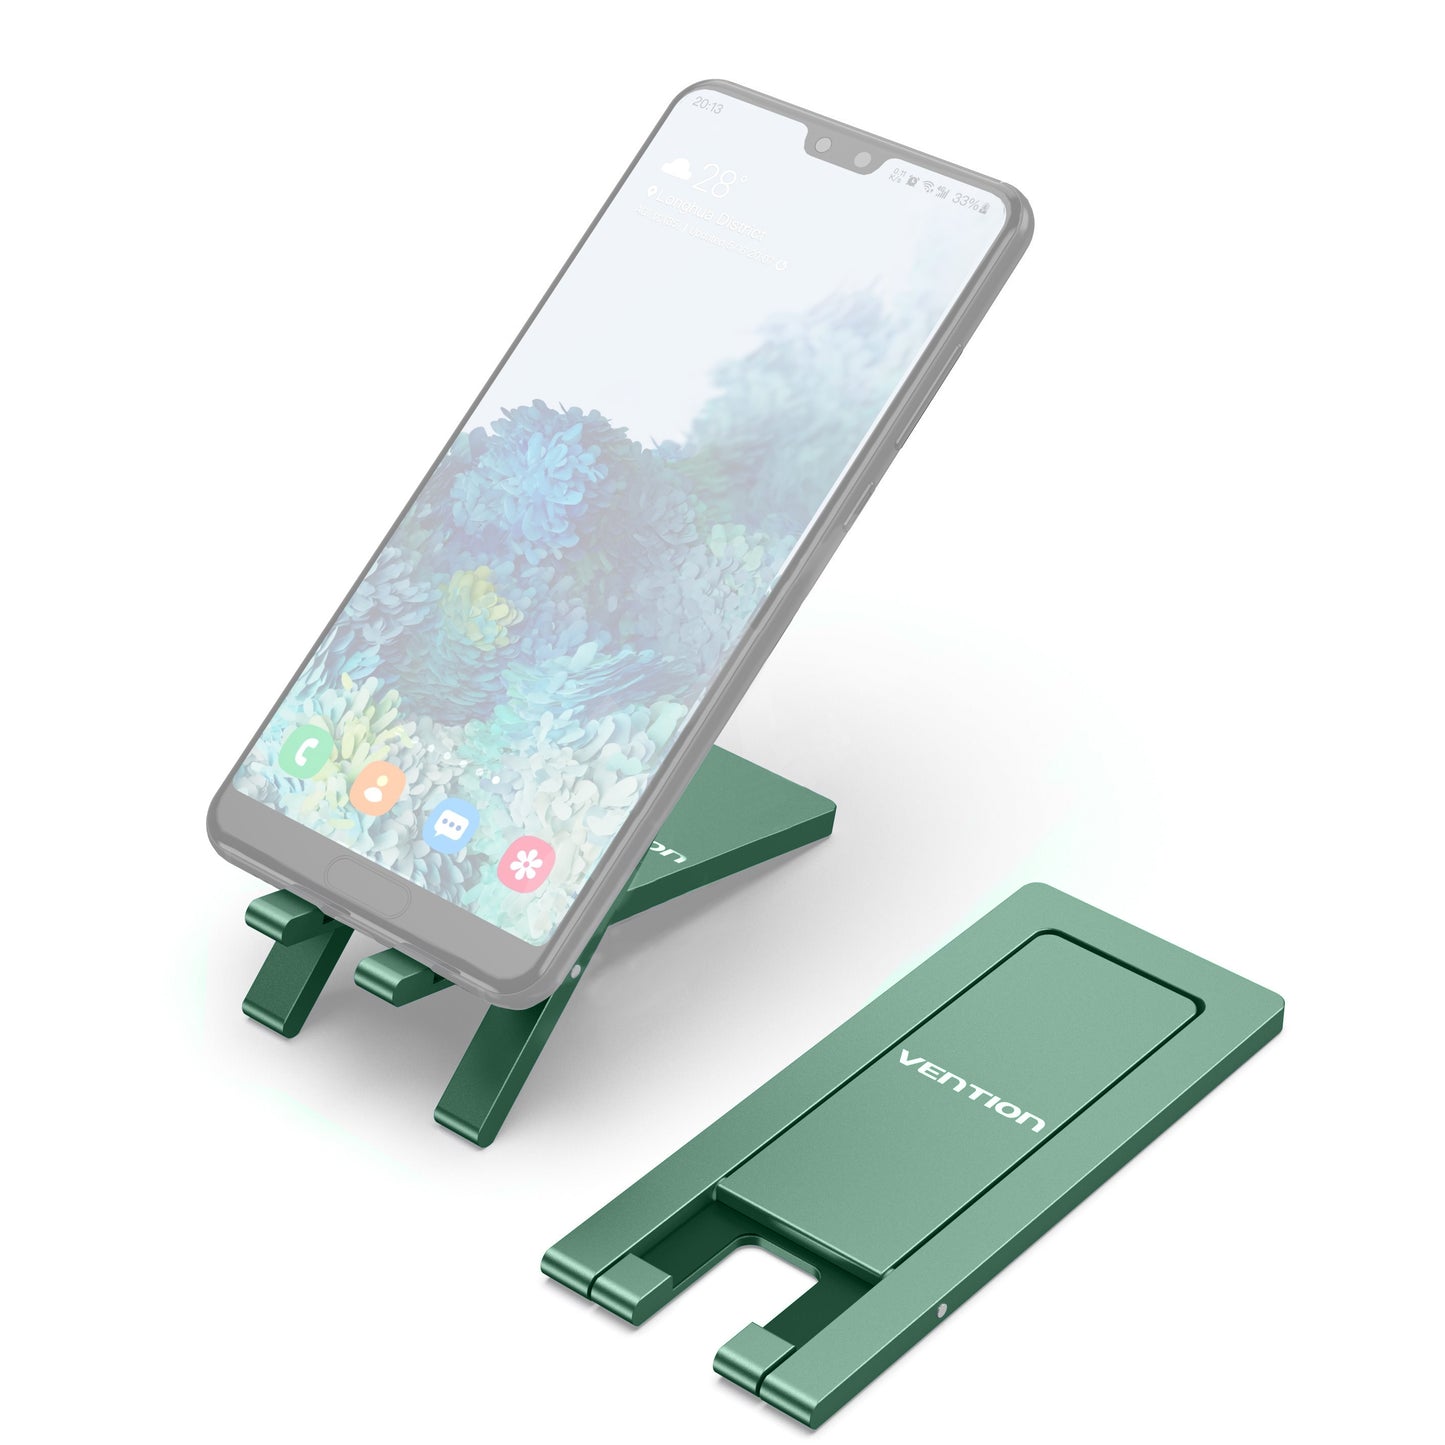 Vention Foldable Aluminum Alloy Desktop Stand Holder with Compact Portable Design for 4.7 to 10" Mobile Phones (Grey, Green, Blue, Purple) | KCY